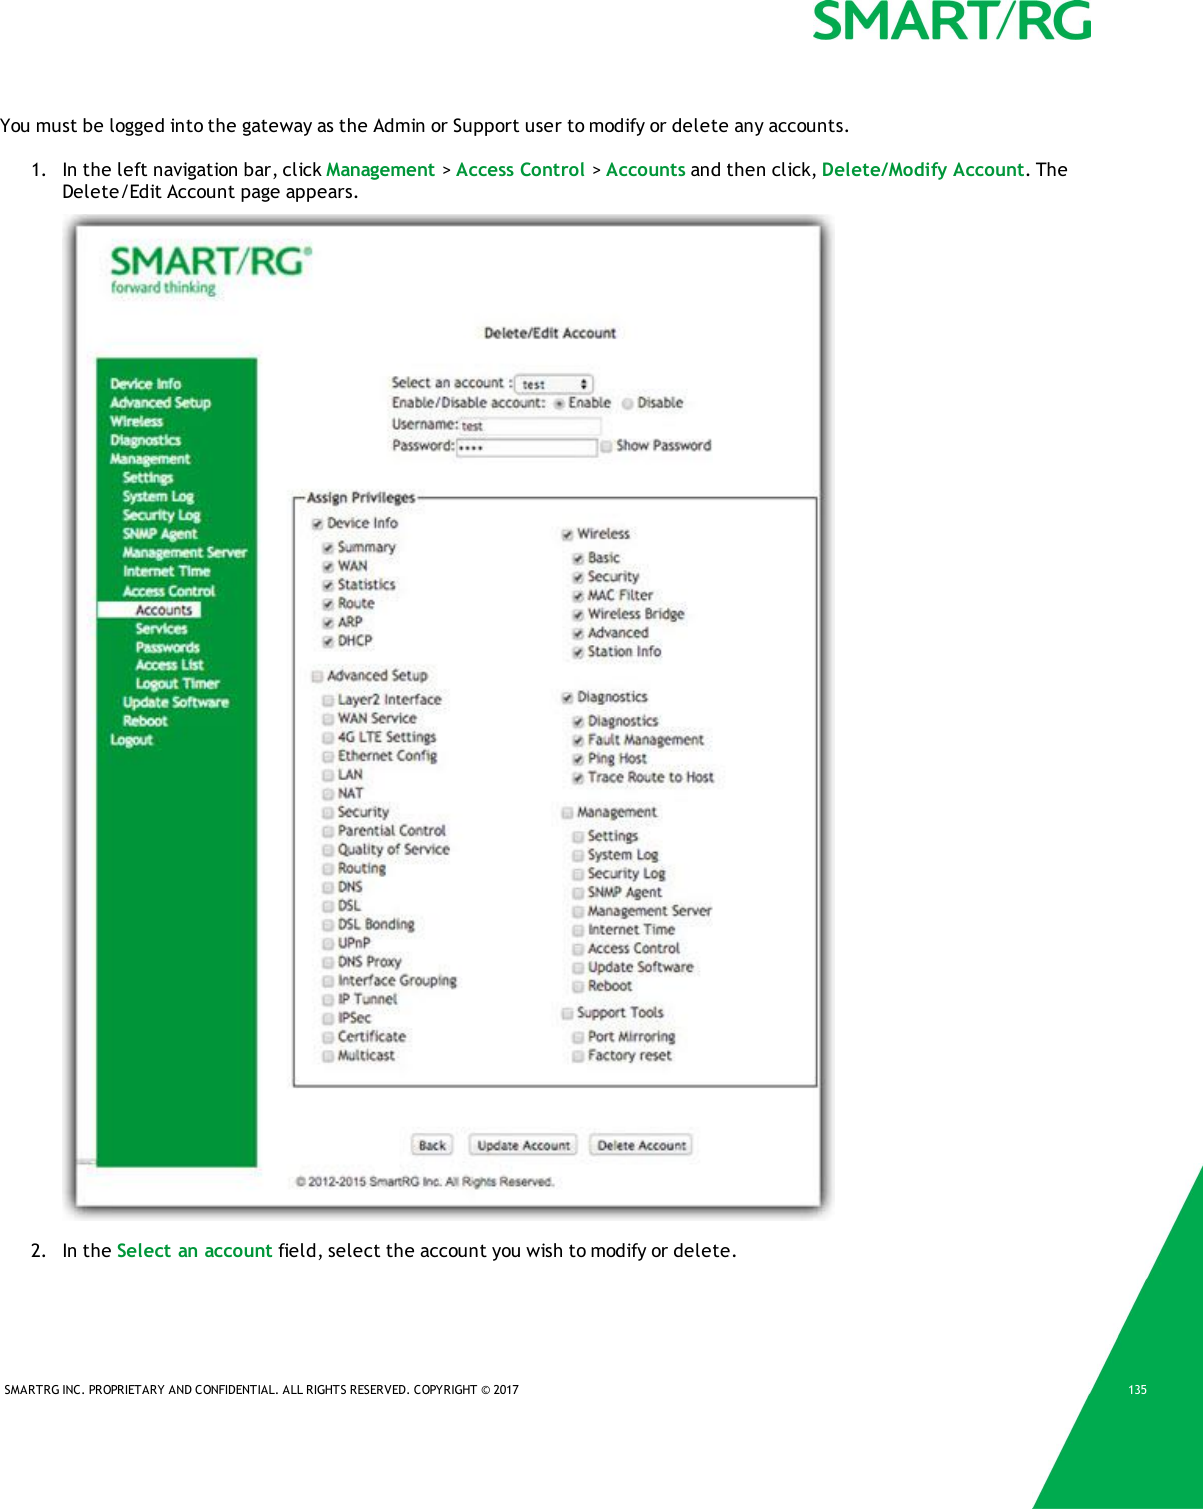 SMARTRG INC. PROPRIETARY AND CONFIDENTIAL. ALL RIGHTS RESERVED. COPYRIGHT © 2017 135You must be logged into the gateway as the Admin or Support user to modify or delete any accounts.1. In the left navigation bar, click Management &gt;Access Control &gt;Accounts and then click, Delete/Modify Account. TheDelete/Edit Account page appears.2. In the Select an account field, select the account you wish to modify or delete.